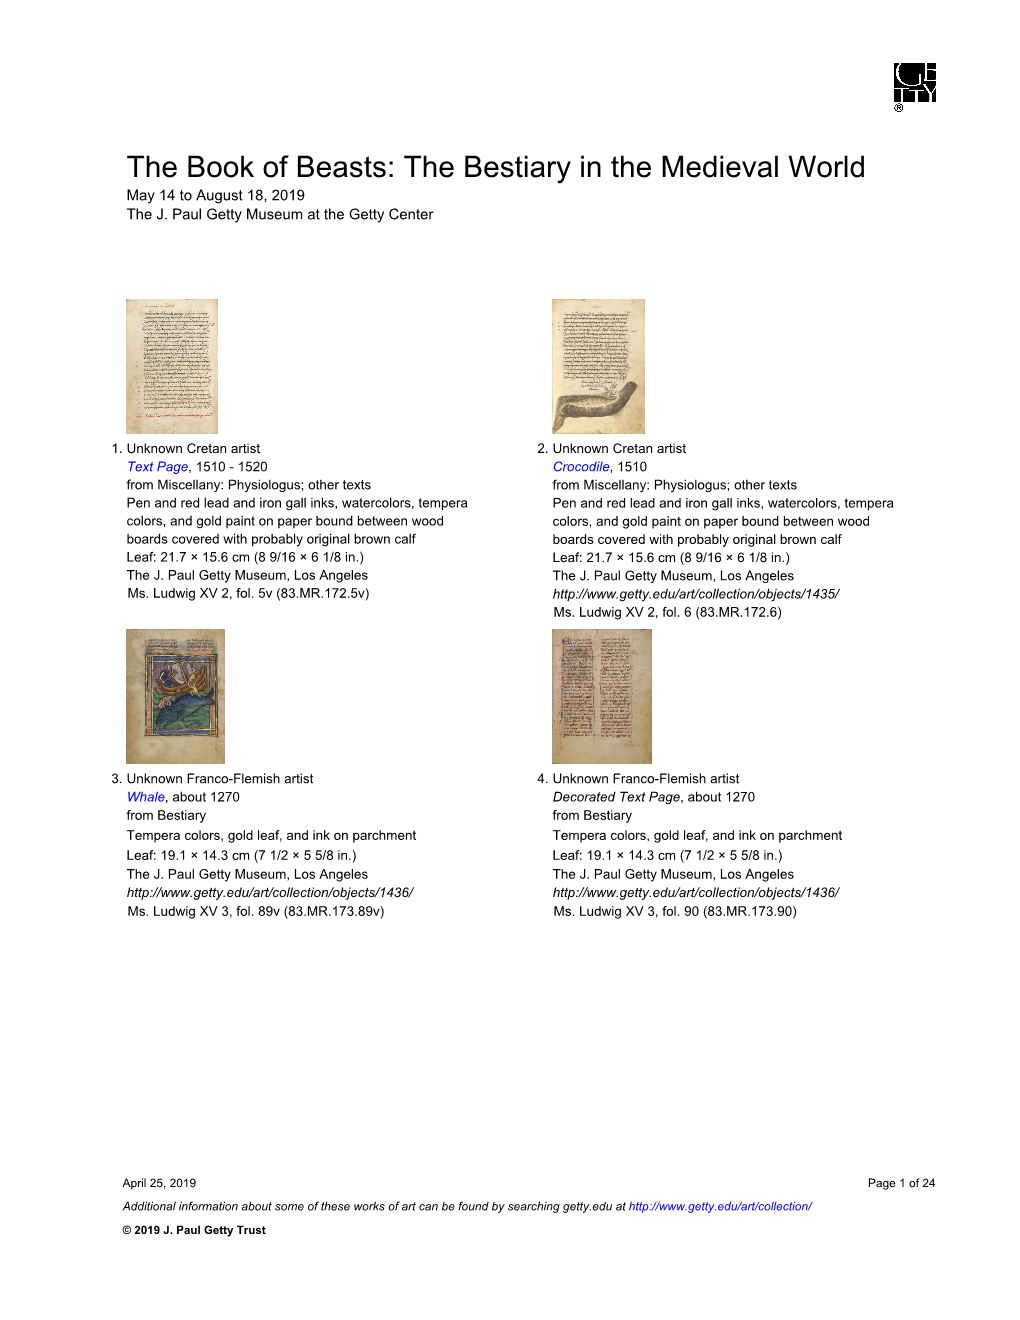 The Book of Beasts: the Bestiary in the Medieval World May 14 to August 18, 2019 the J